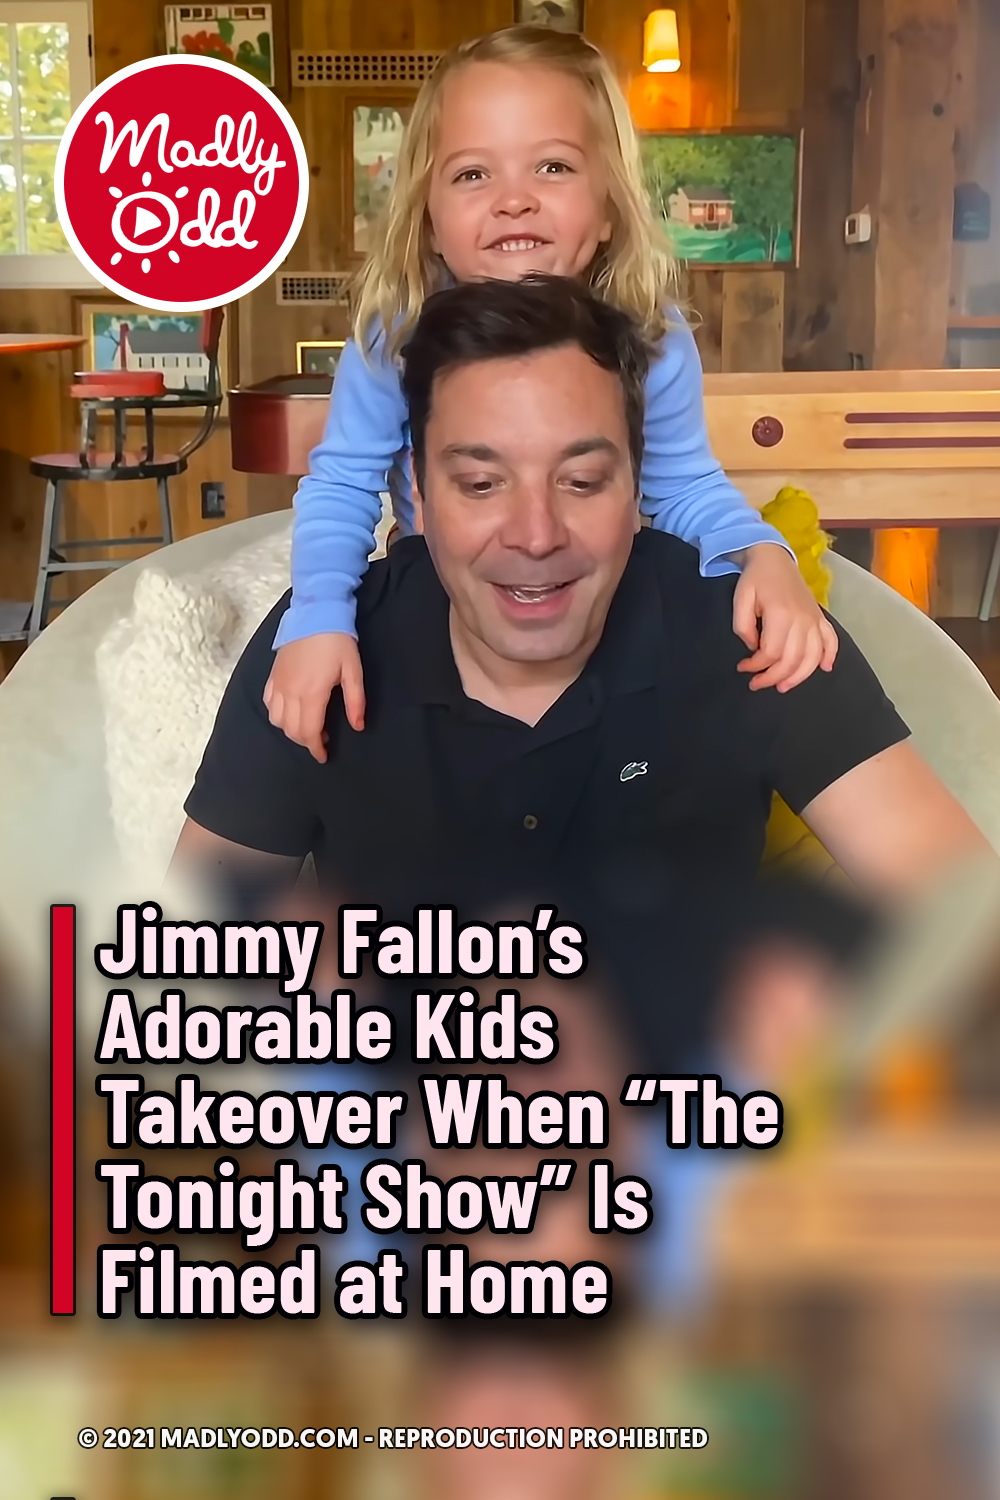 Jimmy Fallon’s Adorable Kids Takeover When “The Tonight Show” Is Filmed at Home